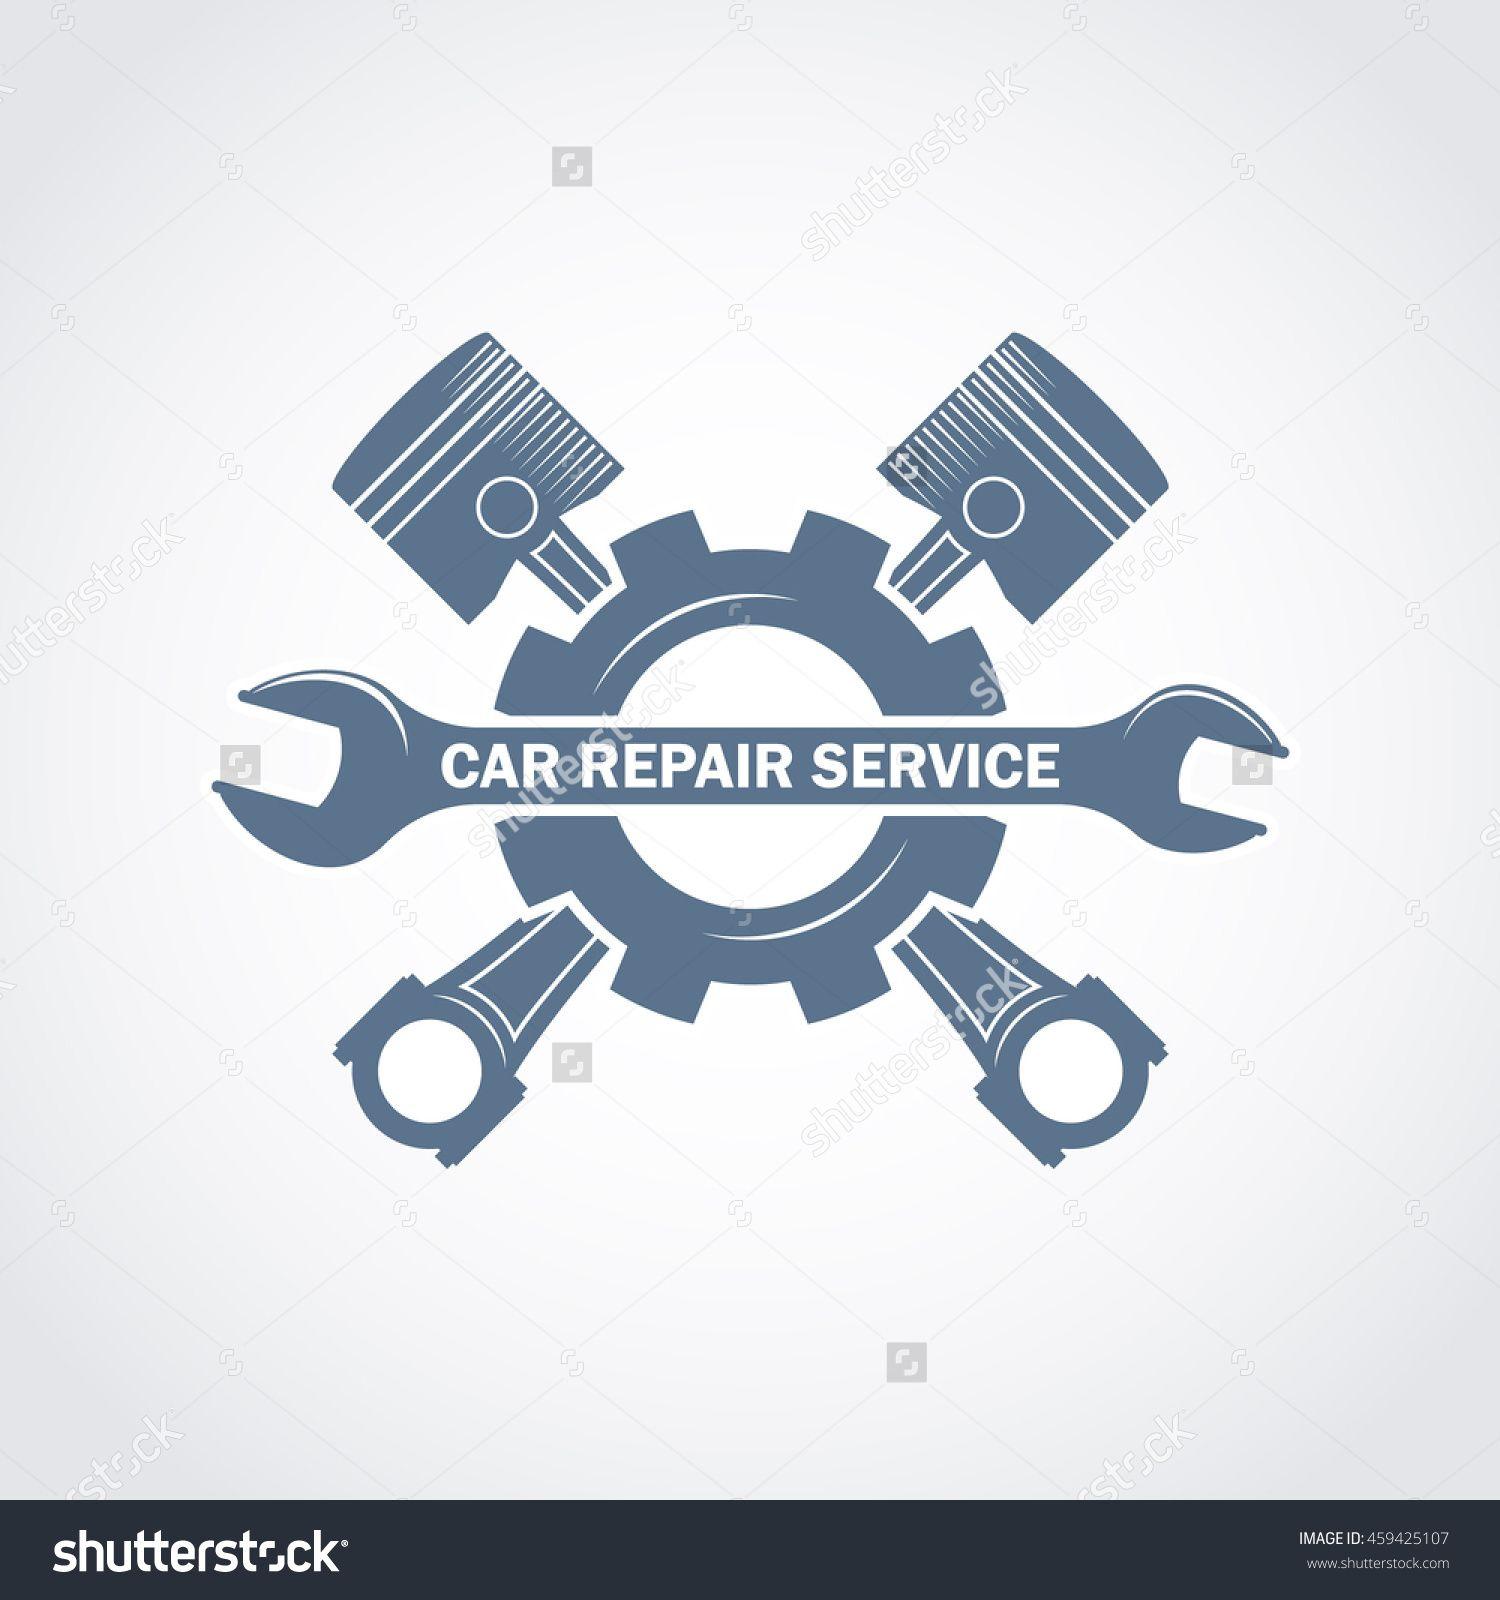 Motorcycle Service Logo - vector monochrome car service logo in retro style with a wrench